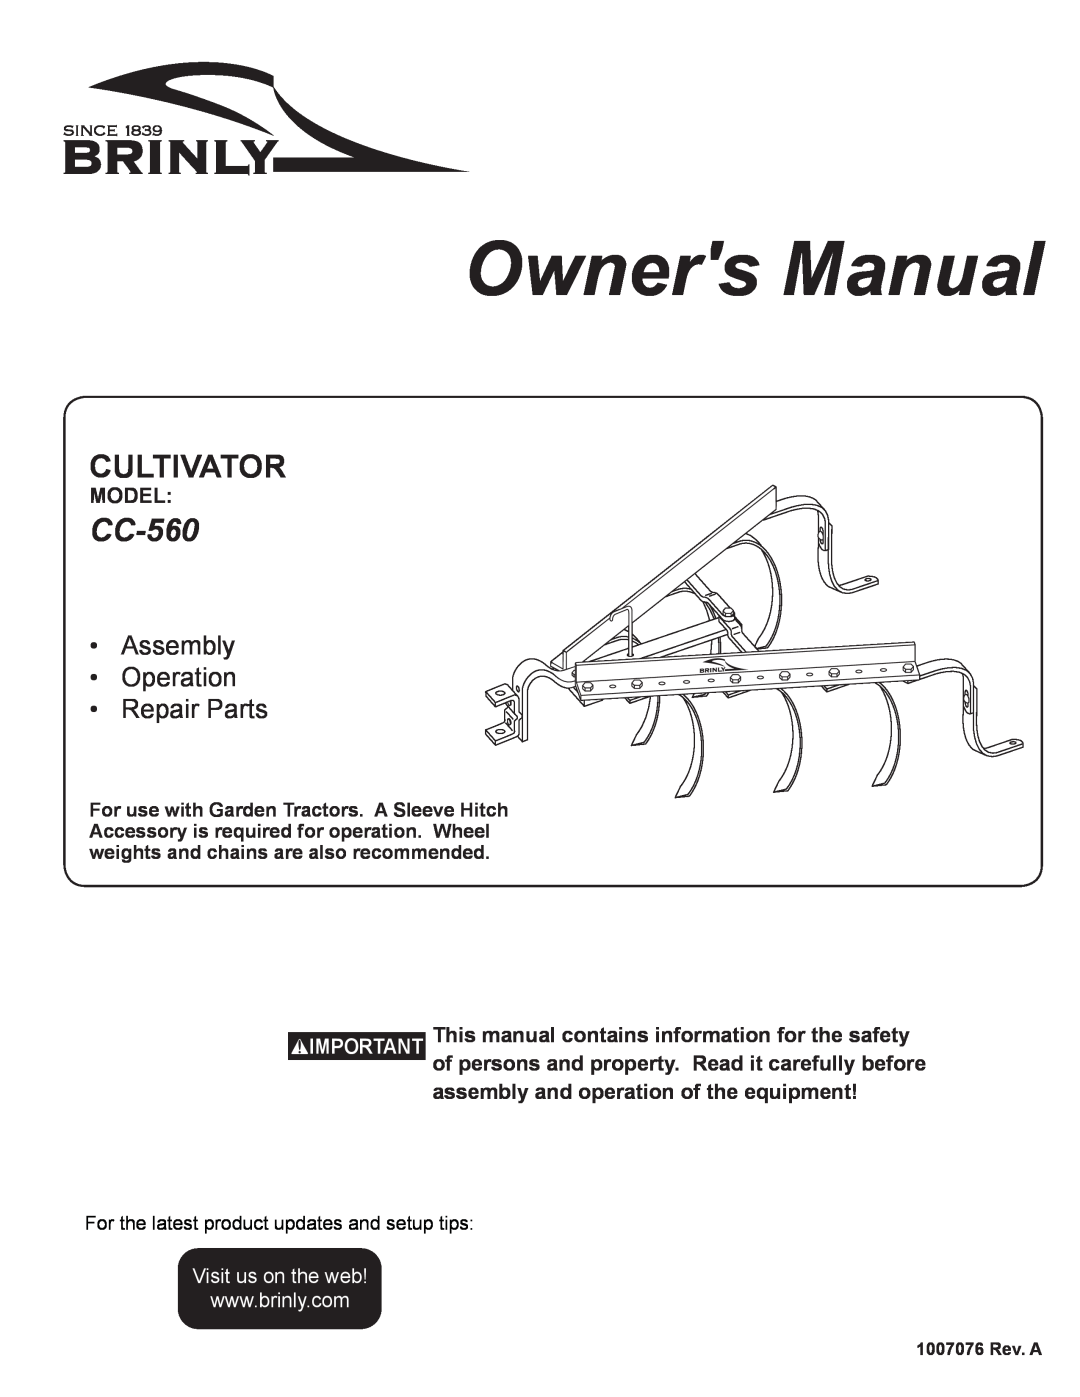 Sears CC-560 manual Model, 1007076 Rev. A, Cultivator, Assembly Operation Repair Parts, Visit us on the web 